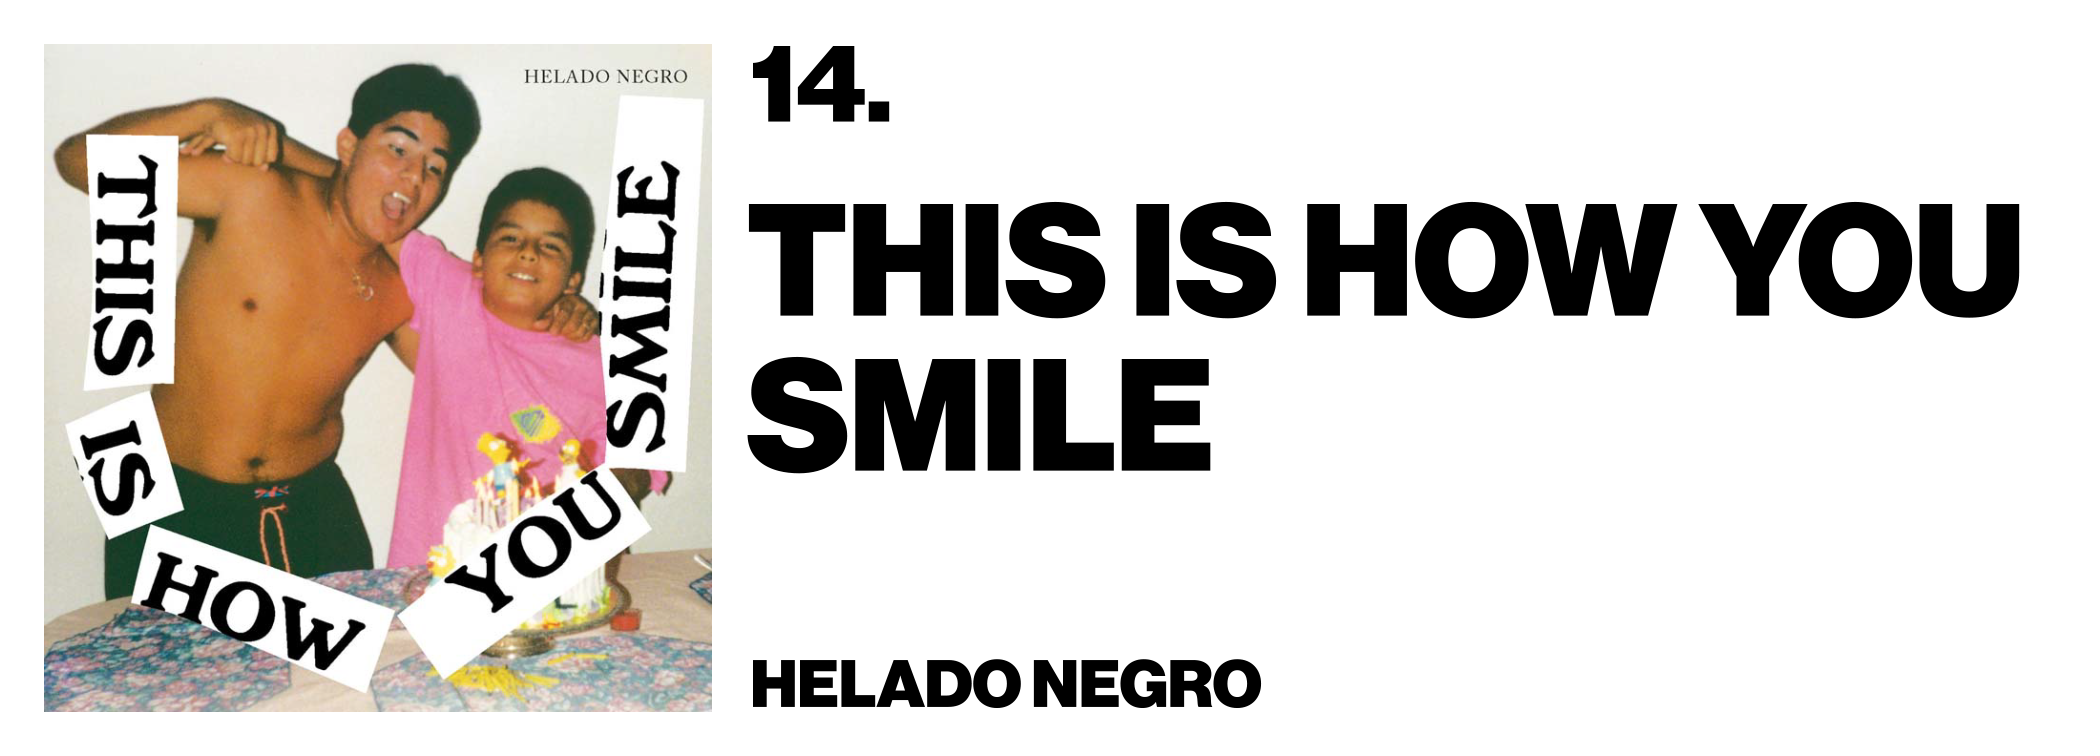 1576014604505-14-Helado-Negro-This-Is-How-You-Smile